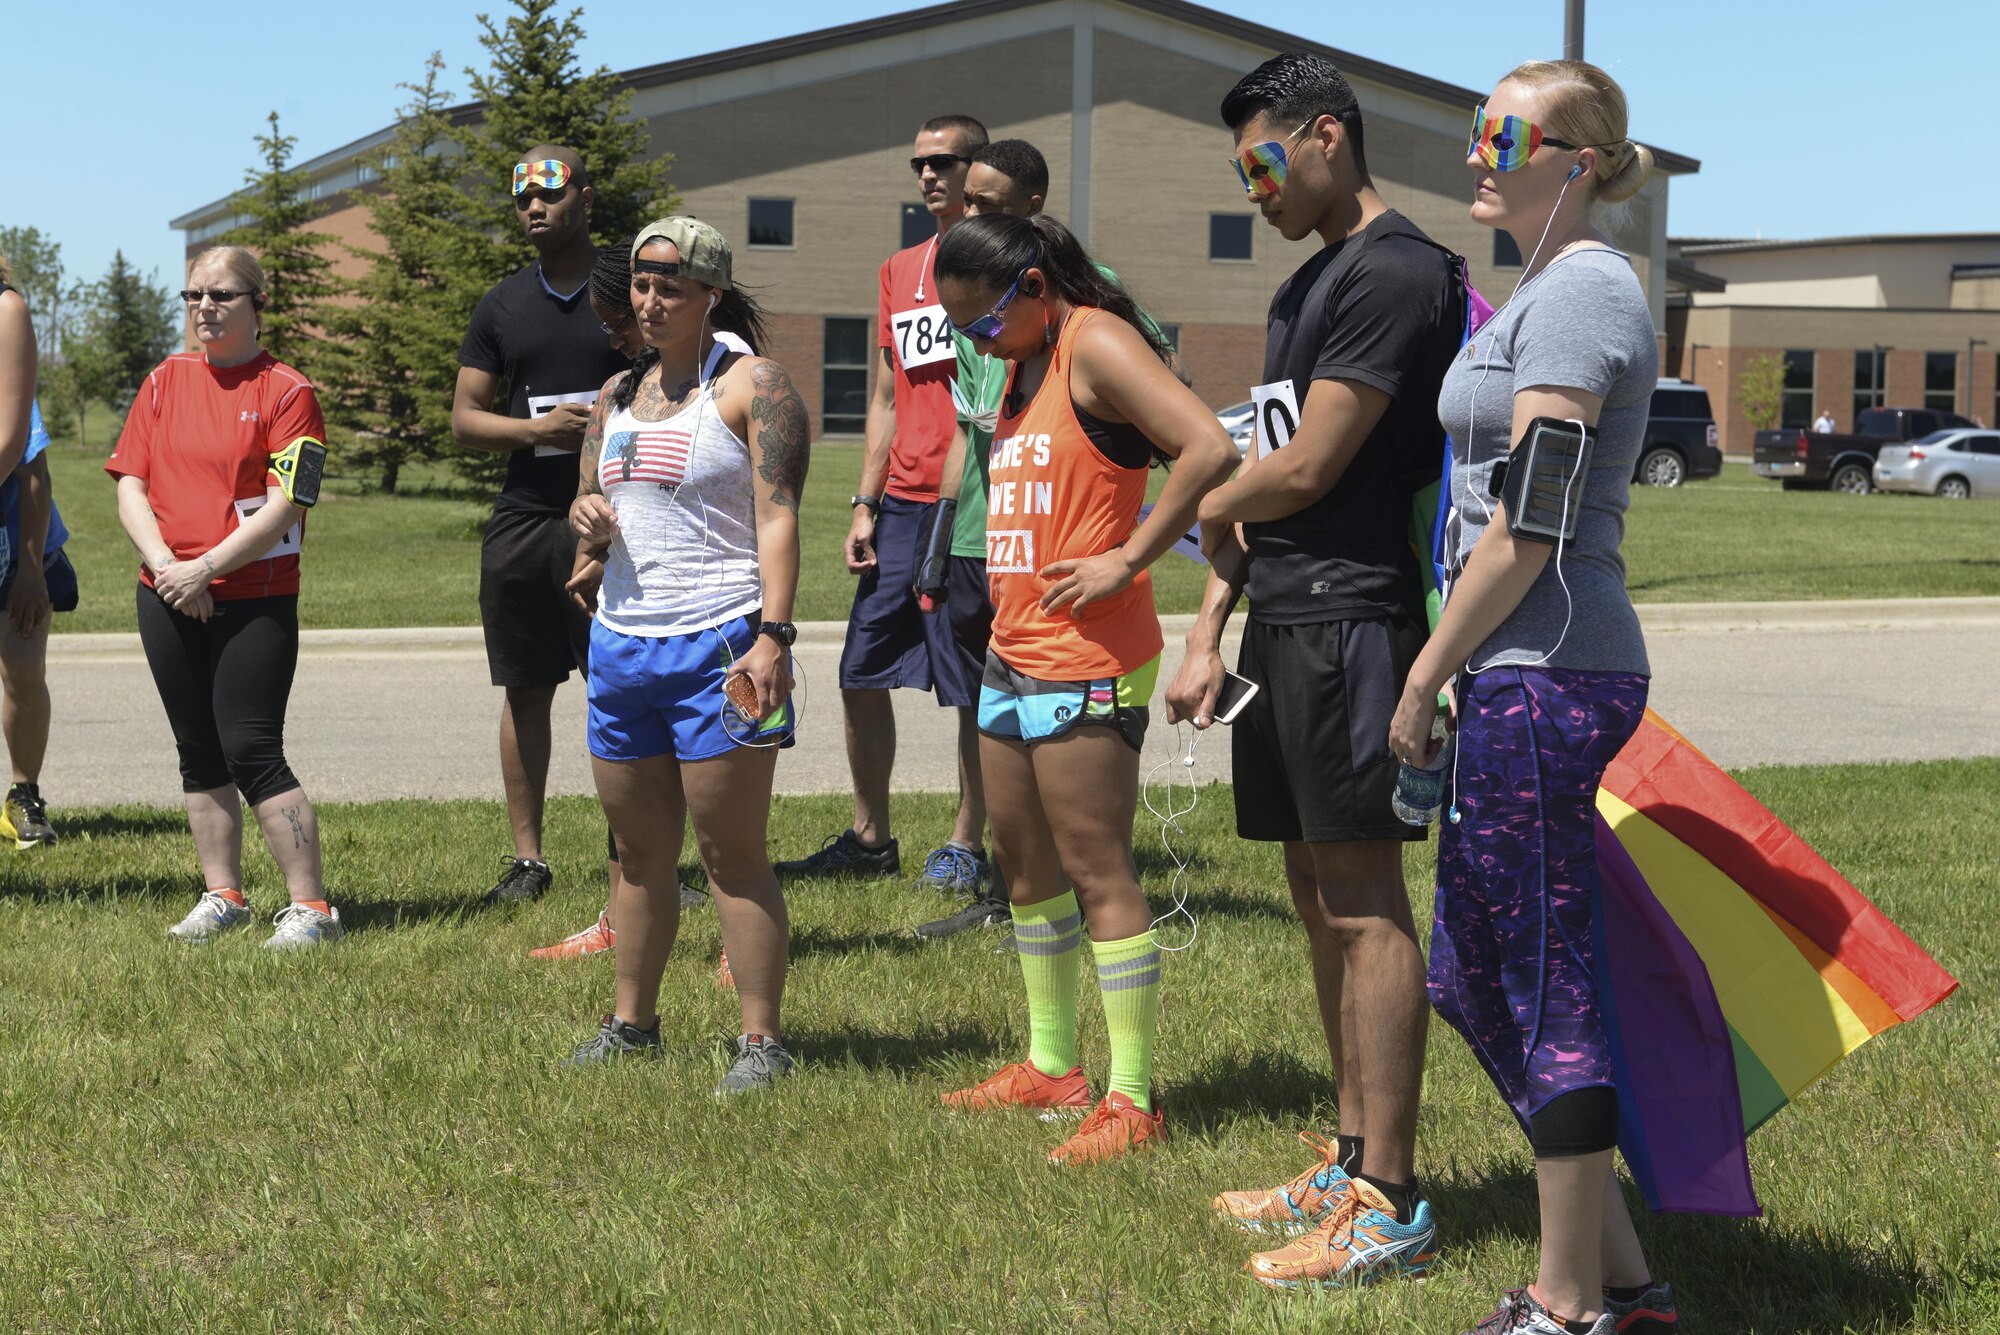 Members of Team Minot and the local community listen while names are read before a memorial 5K at Minot Air Force Base, N.D., June 17, 2016. The race was organized by the Minot AFB Diversity Committee to pay respects to the 49 lives lost in the Orlando shooting June 12. (U.S. Air Force photo/Airman 1st Class Jessica Weissman)